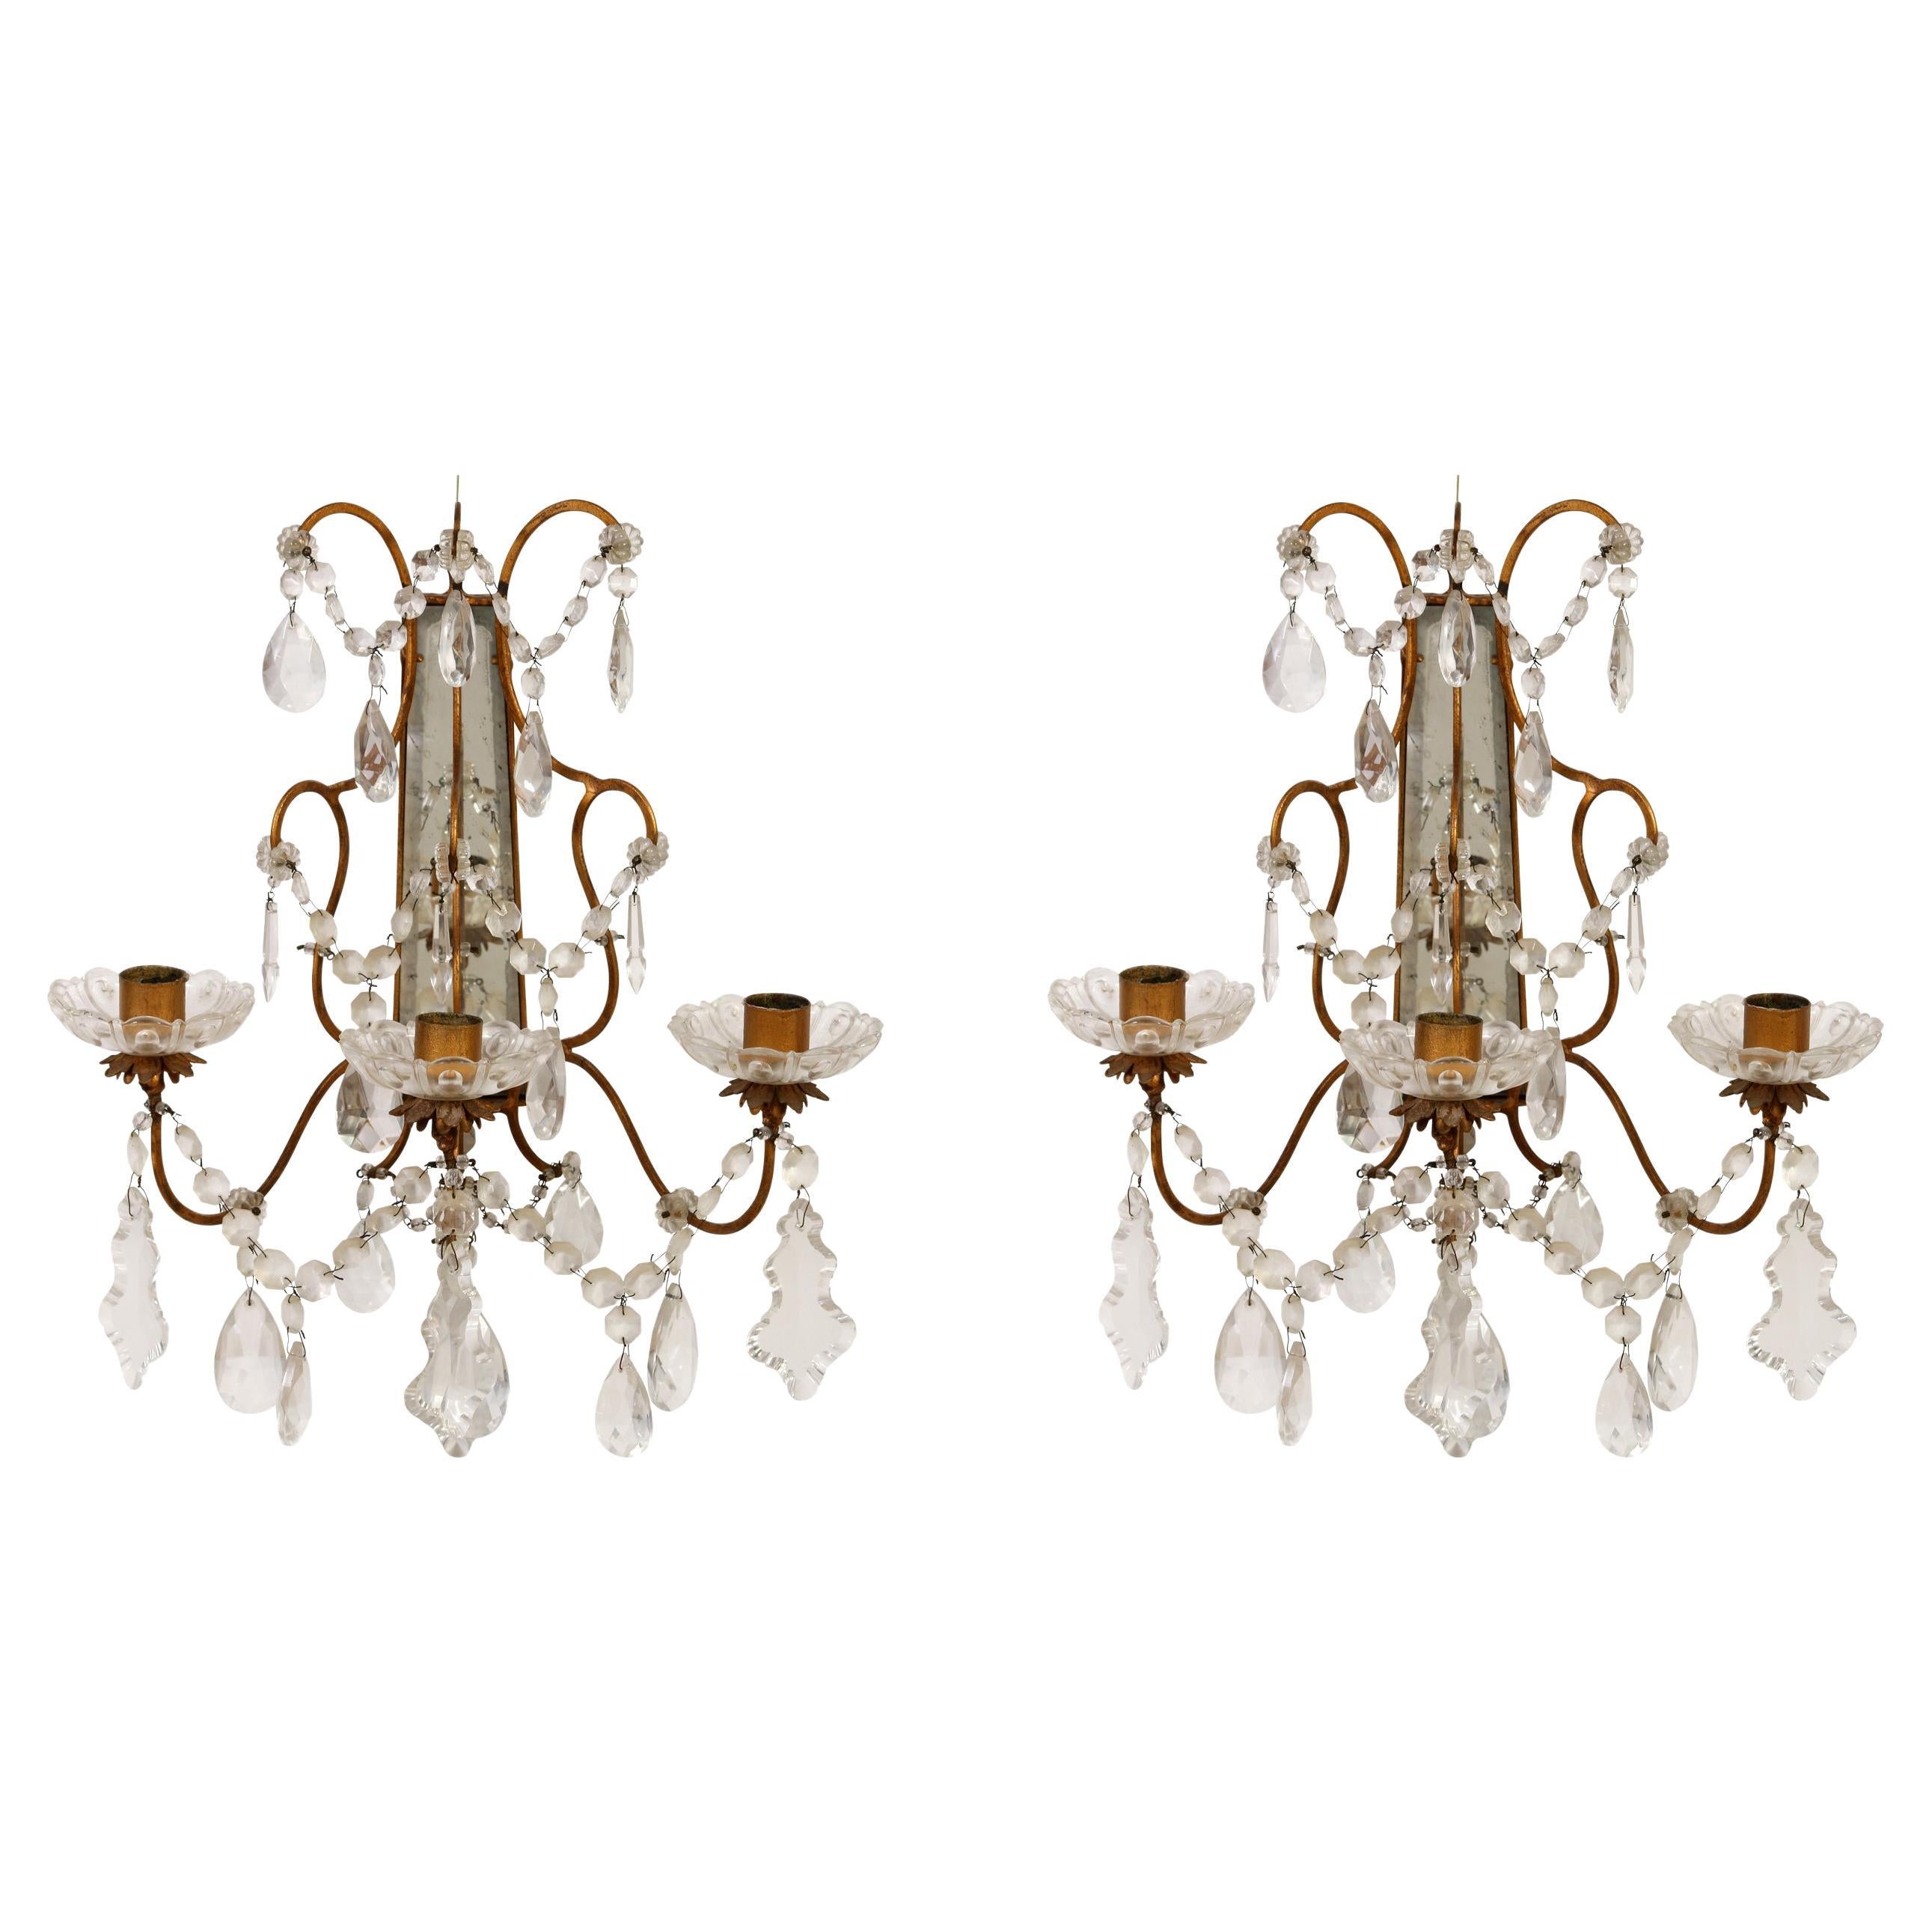 Pair of Brass Three Arm Candle Sconces with Crystals